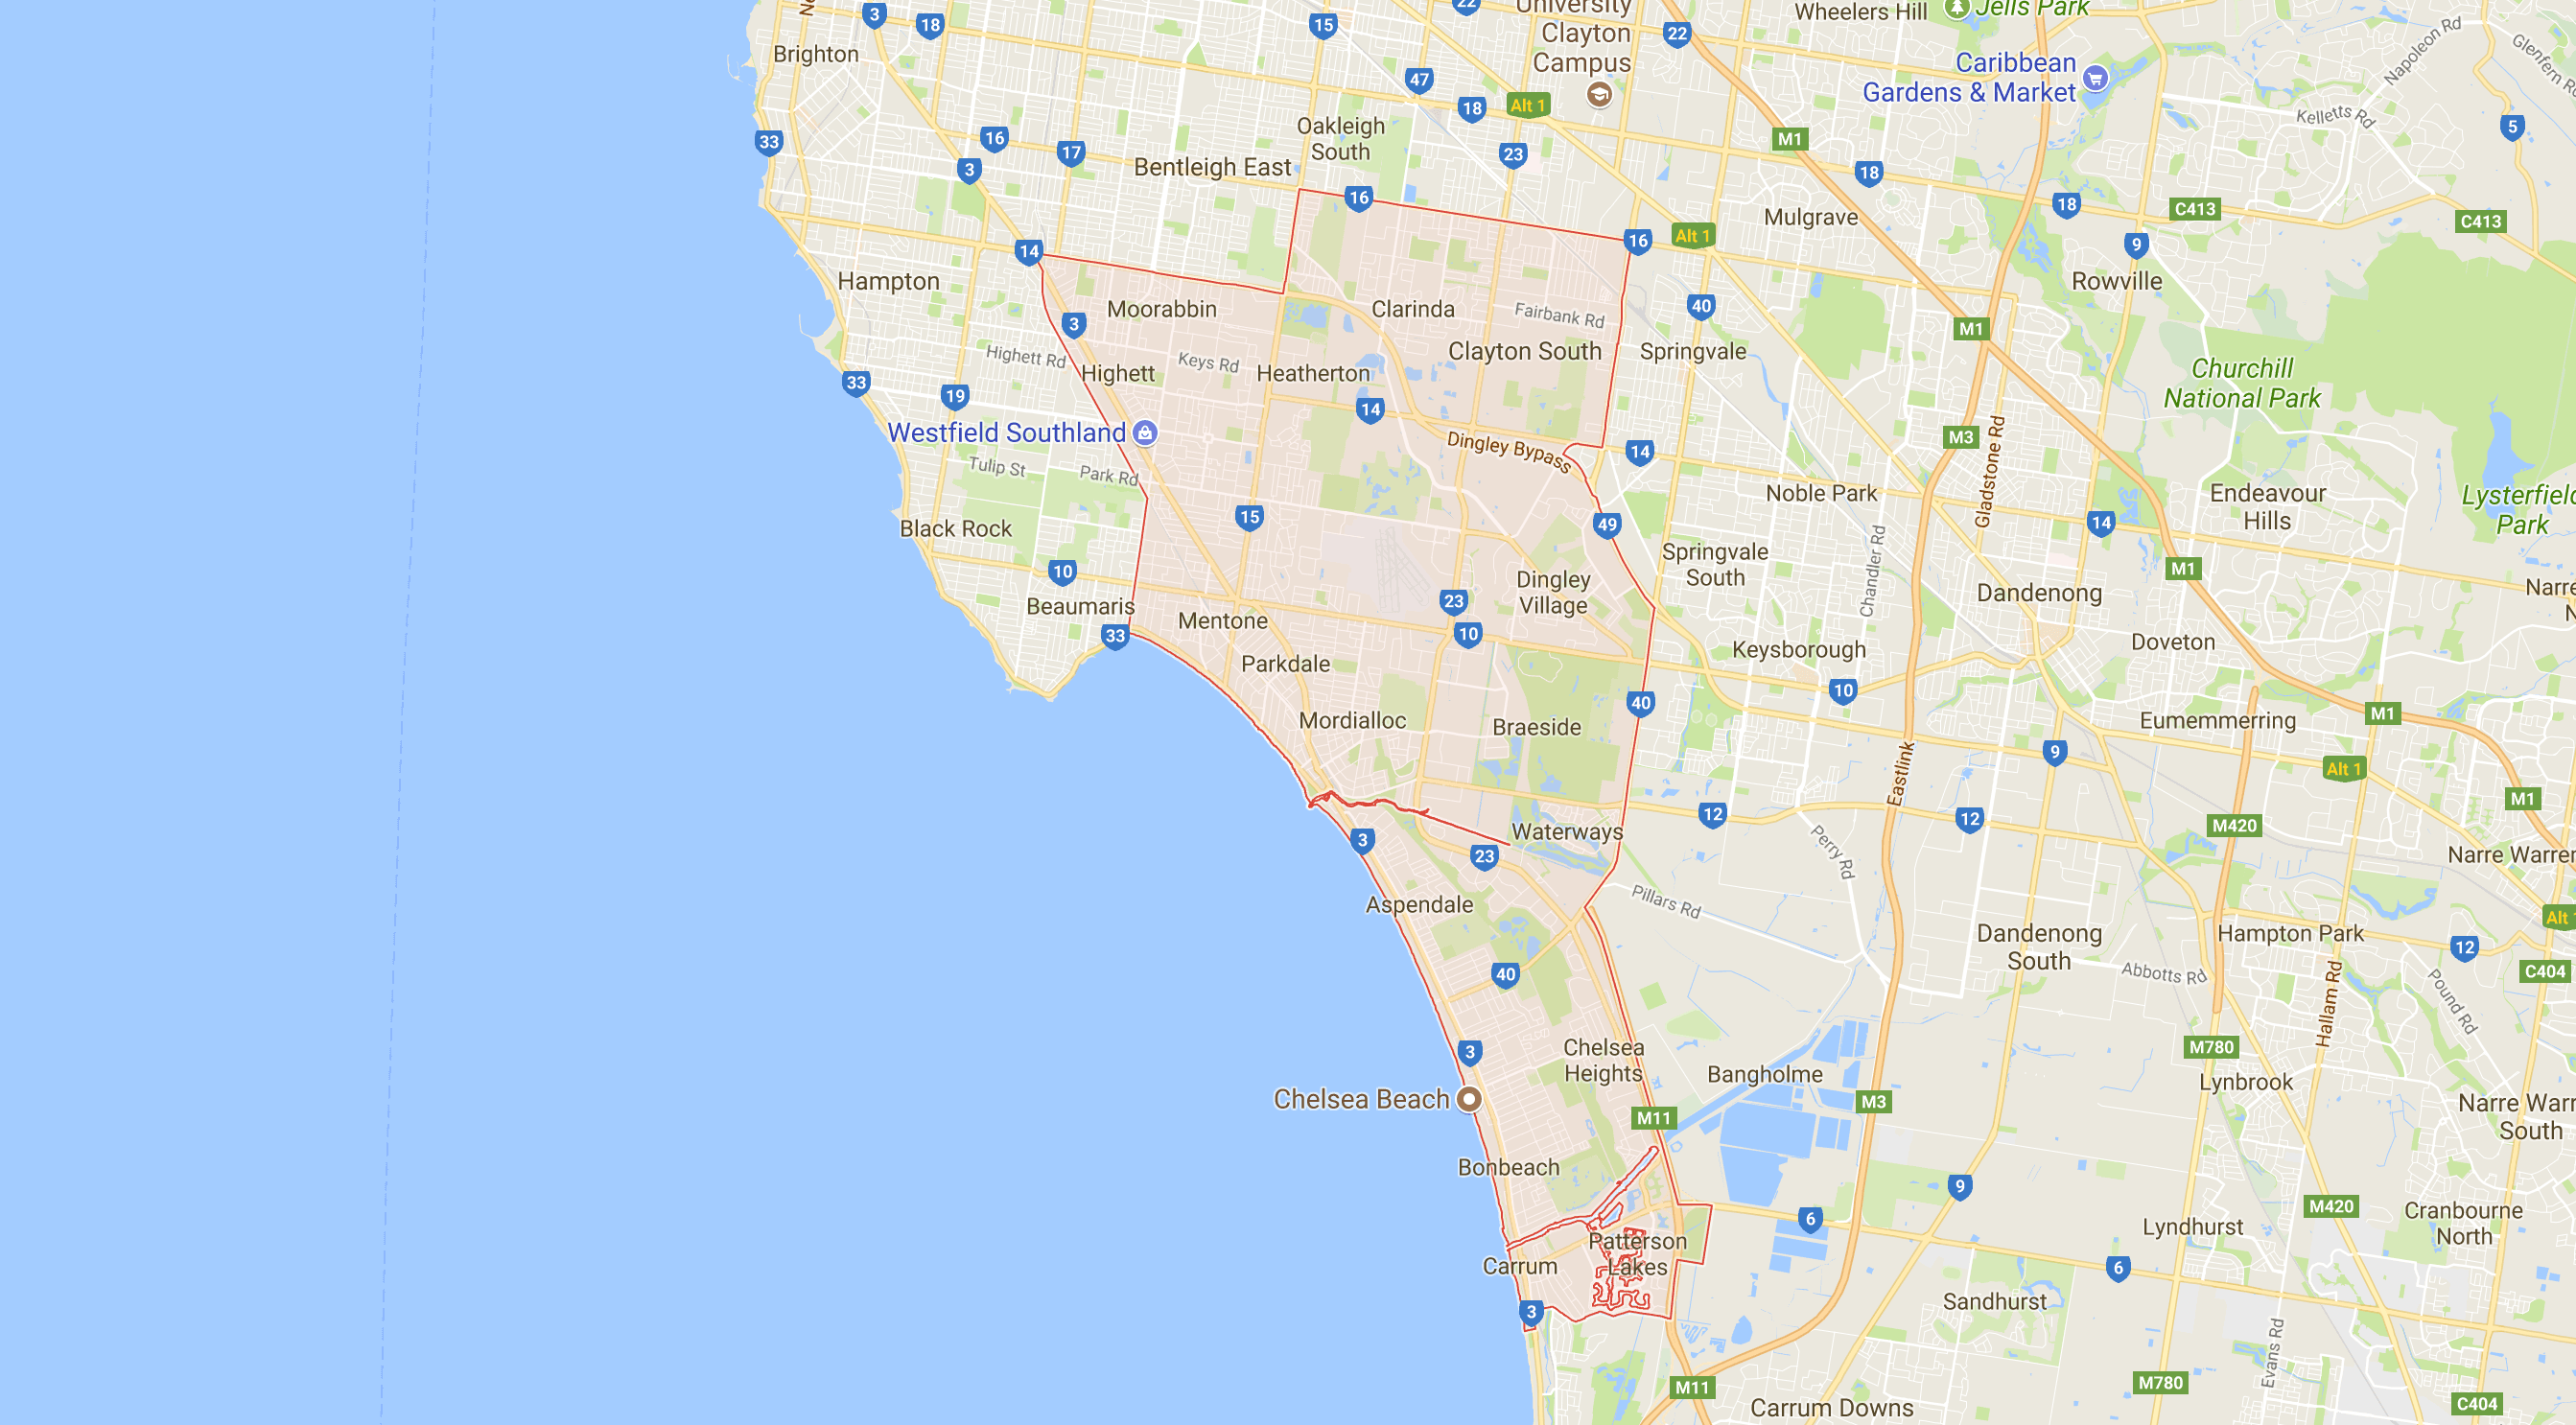 City of Kingston Melbourne Service Areas Your Mac Tech